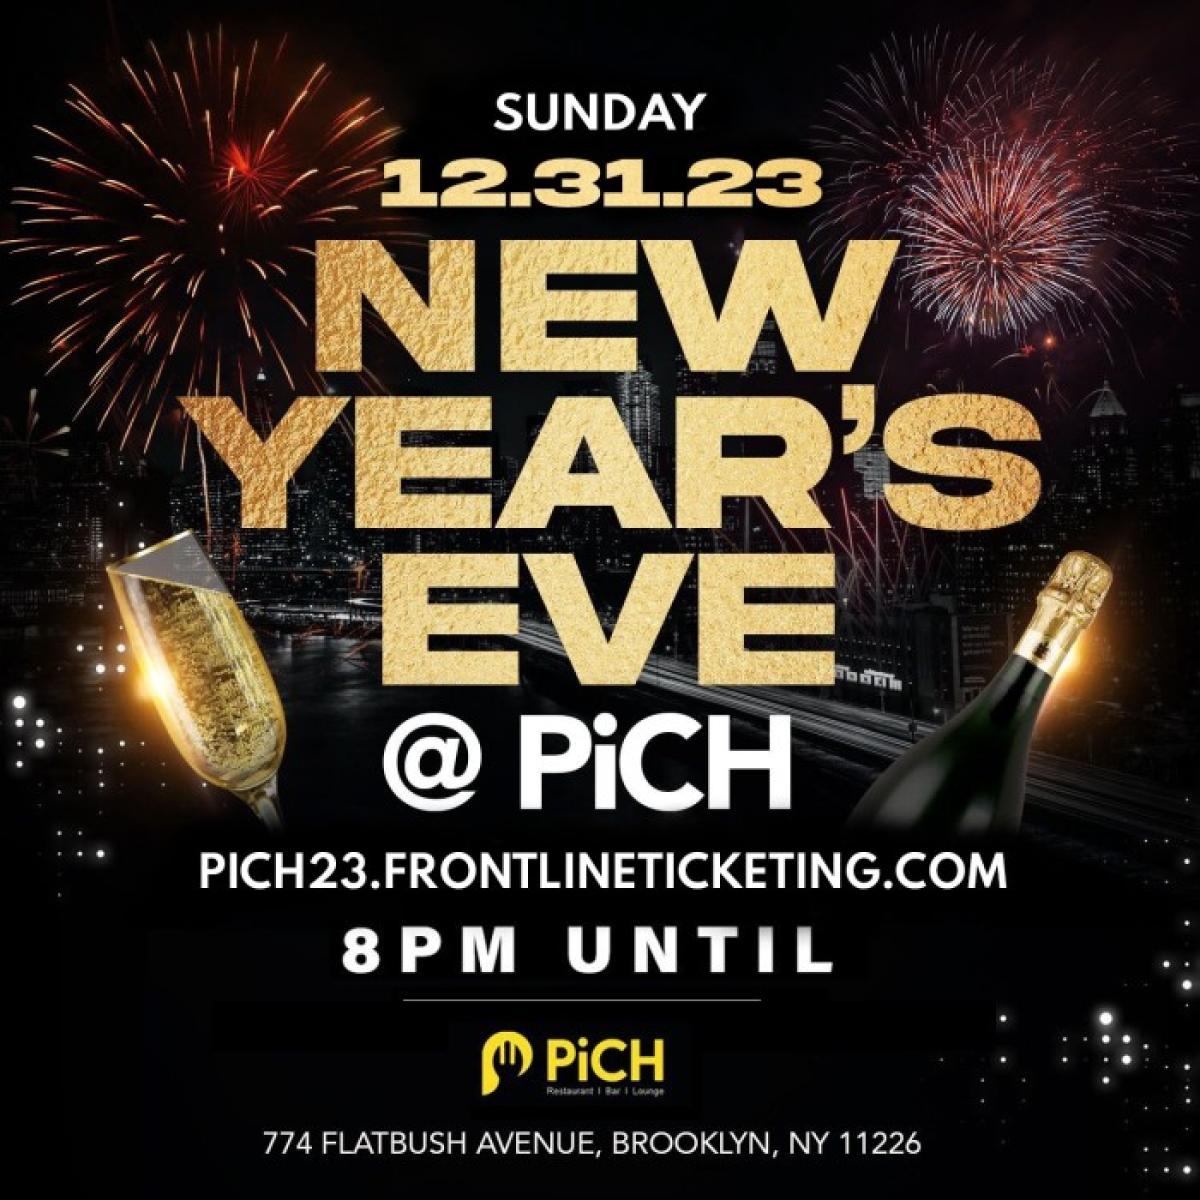 New Year's Eve @ PiCH flyer or graphic.